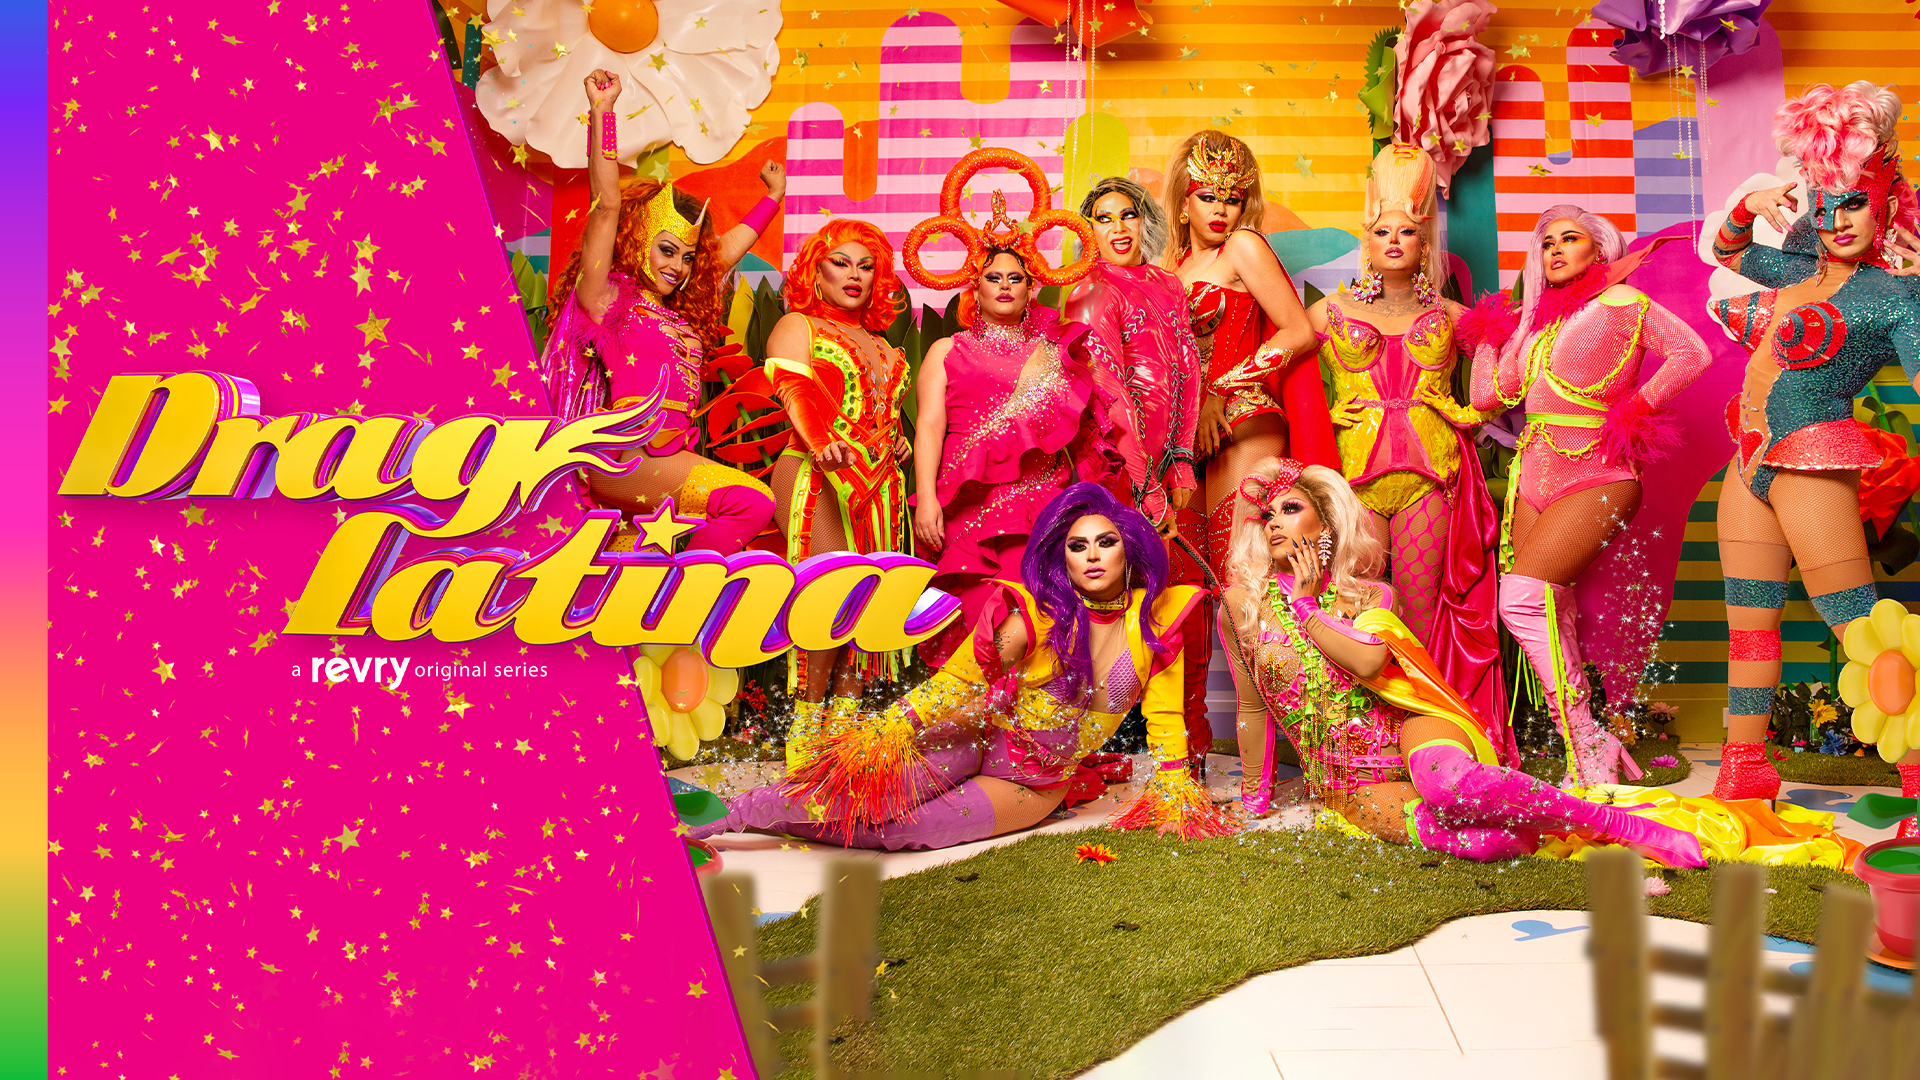 RuPaul's Drag Race UK: The Podcast. Scaredy Cat on her sexuality